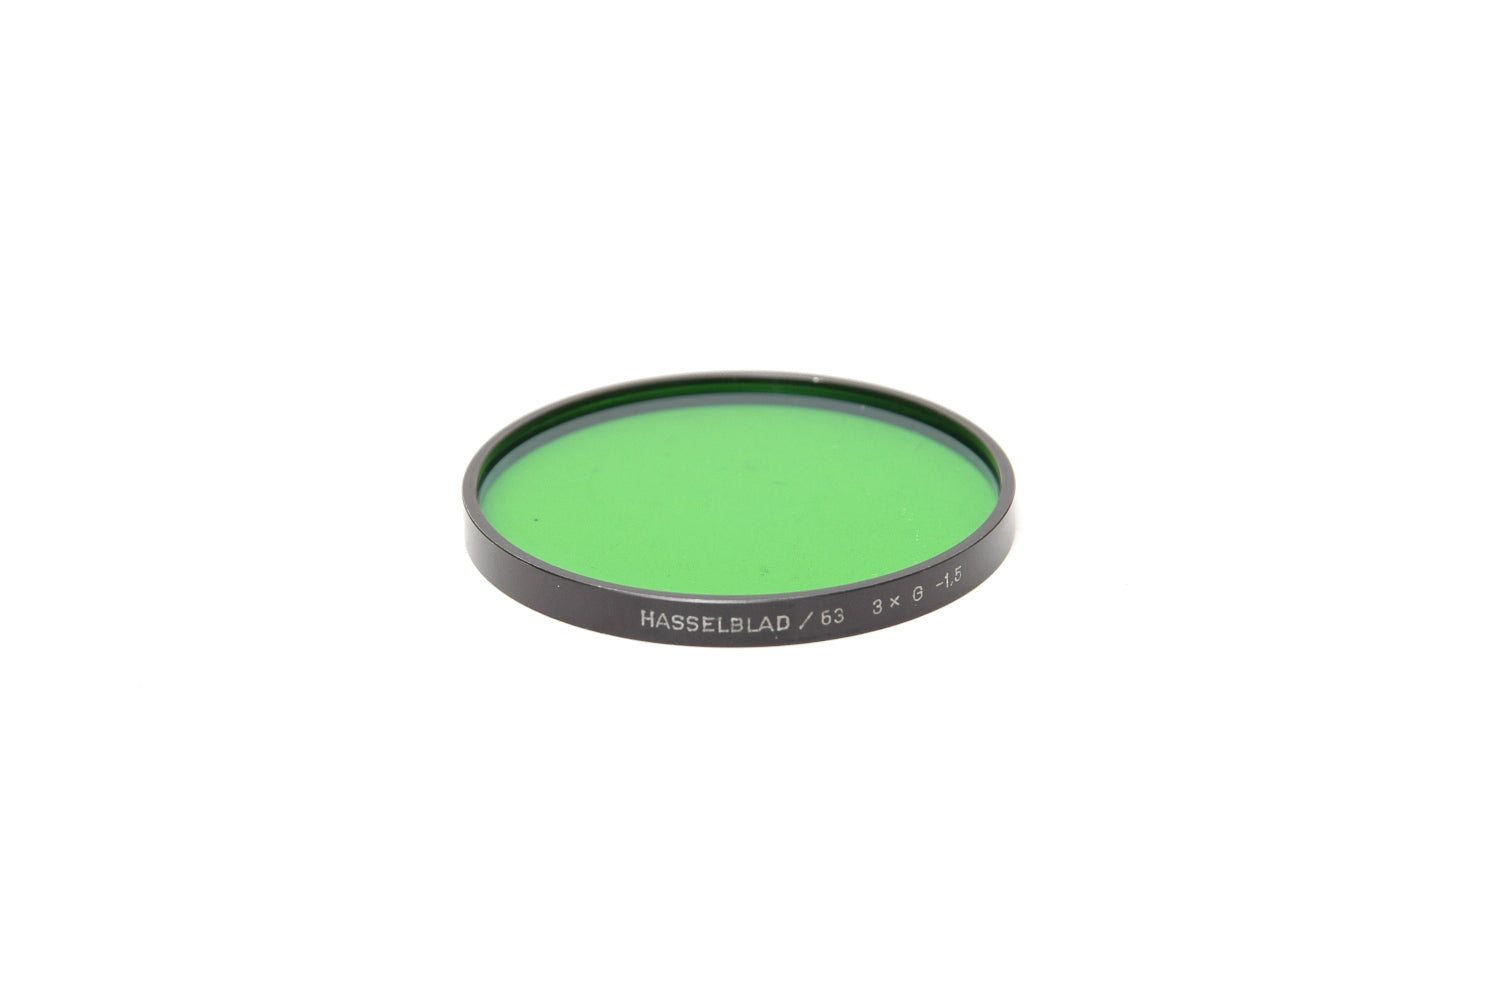 Used Hasselblad 63 3xG -1.5 Green Filter